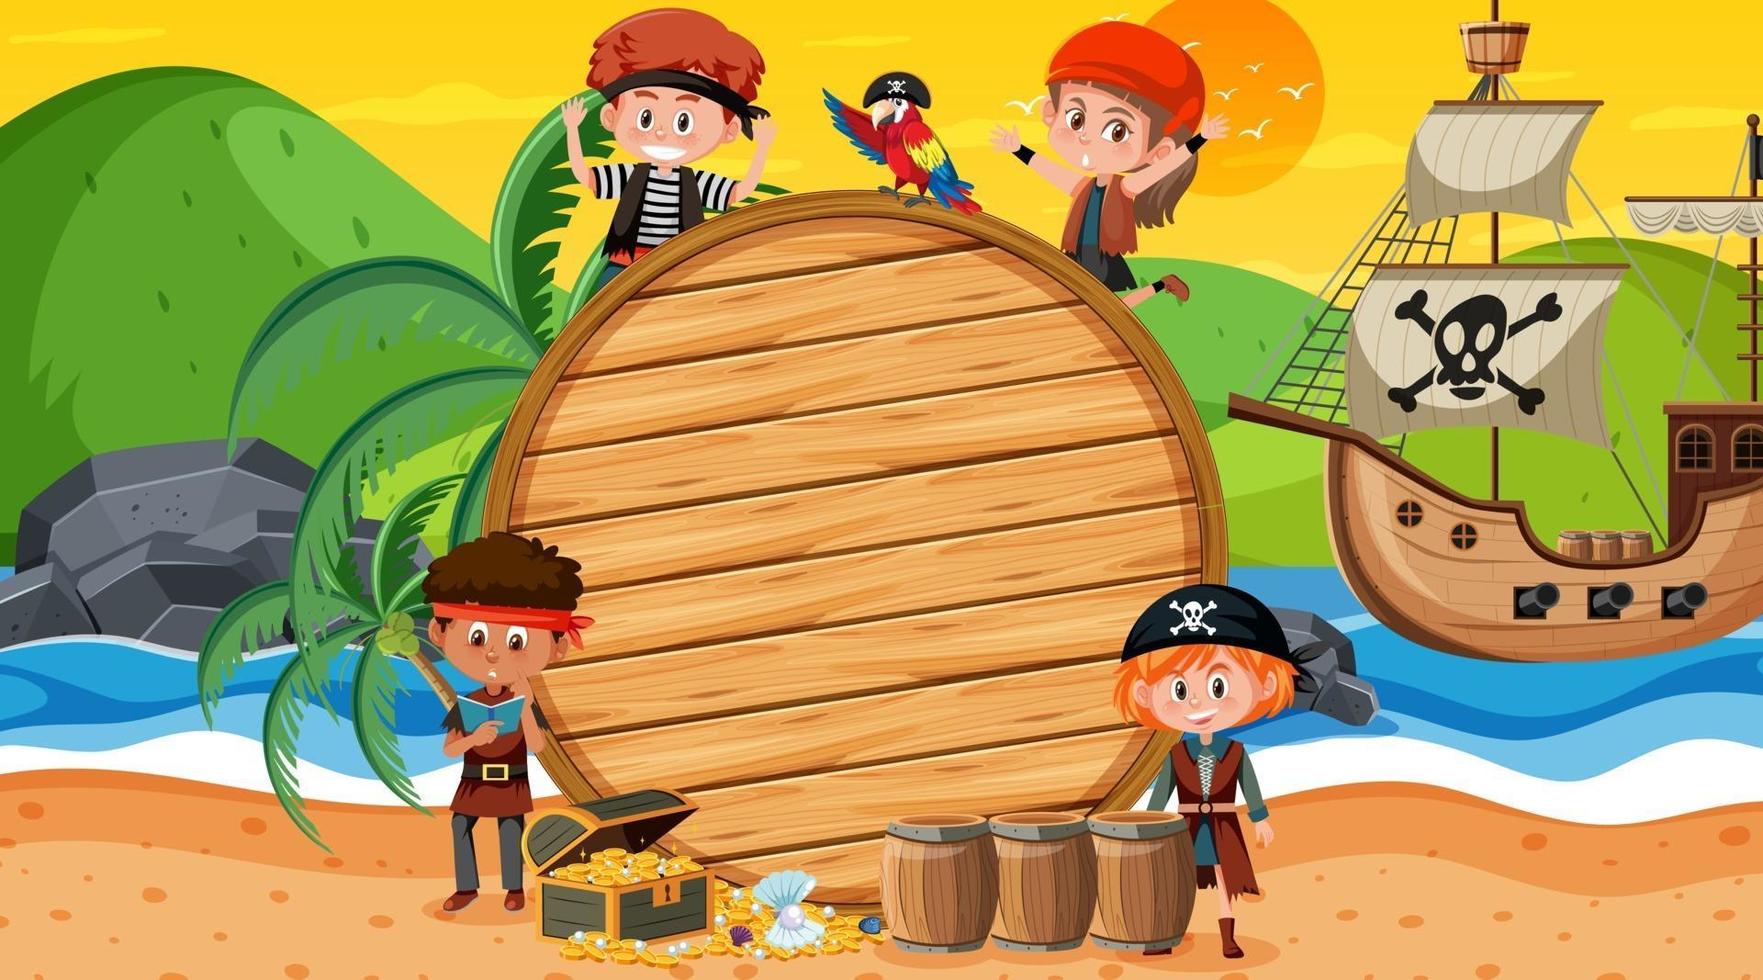 Empty banner template with pirate kids at the beach sunset scene vector